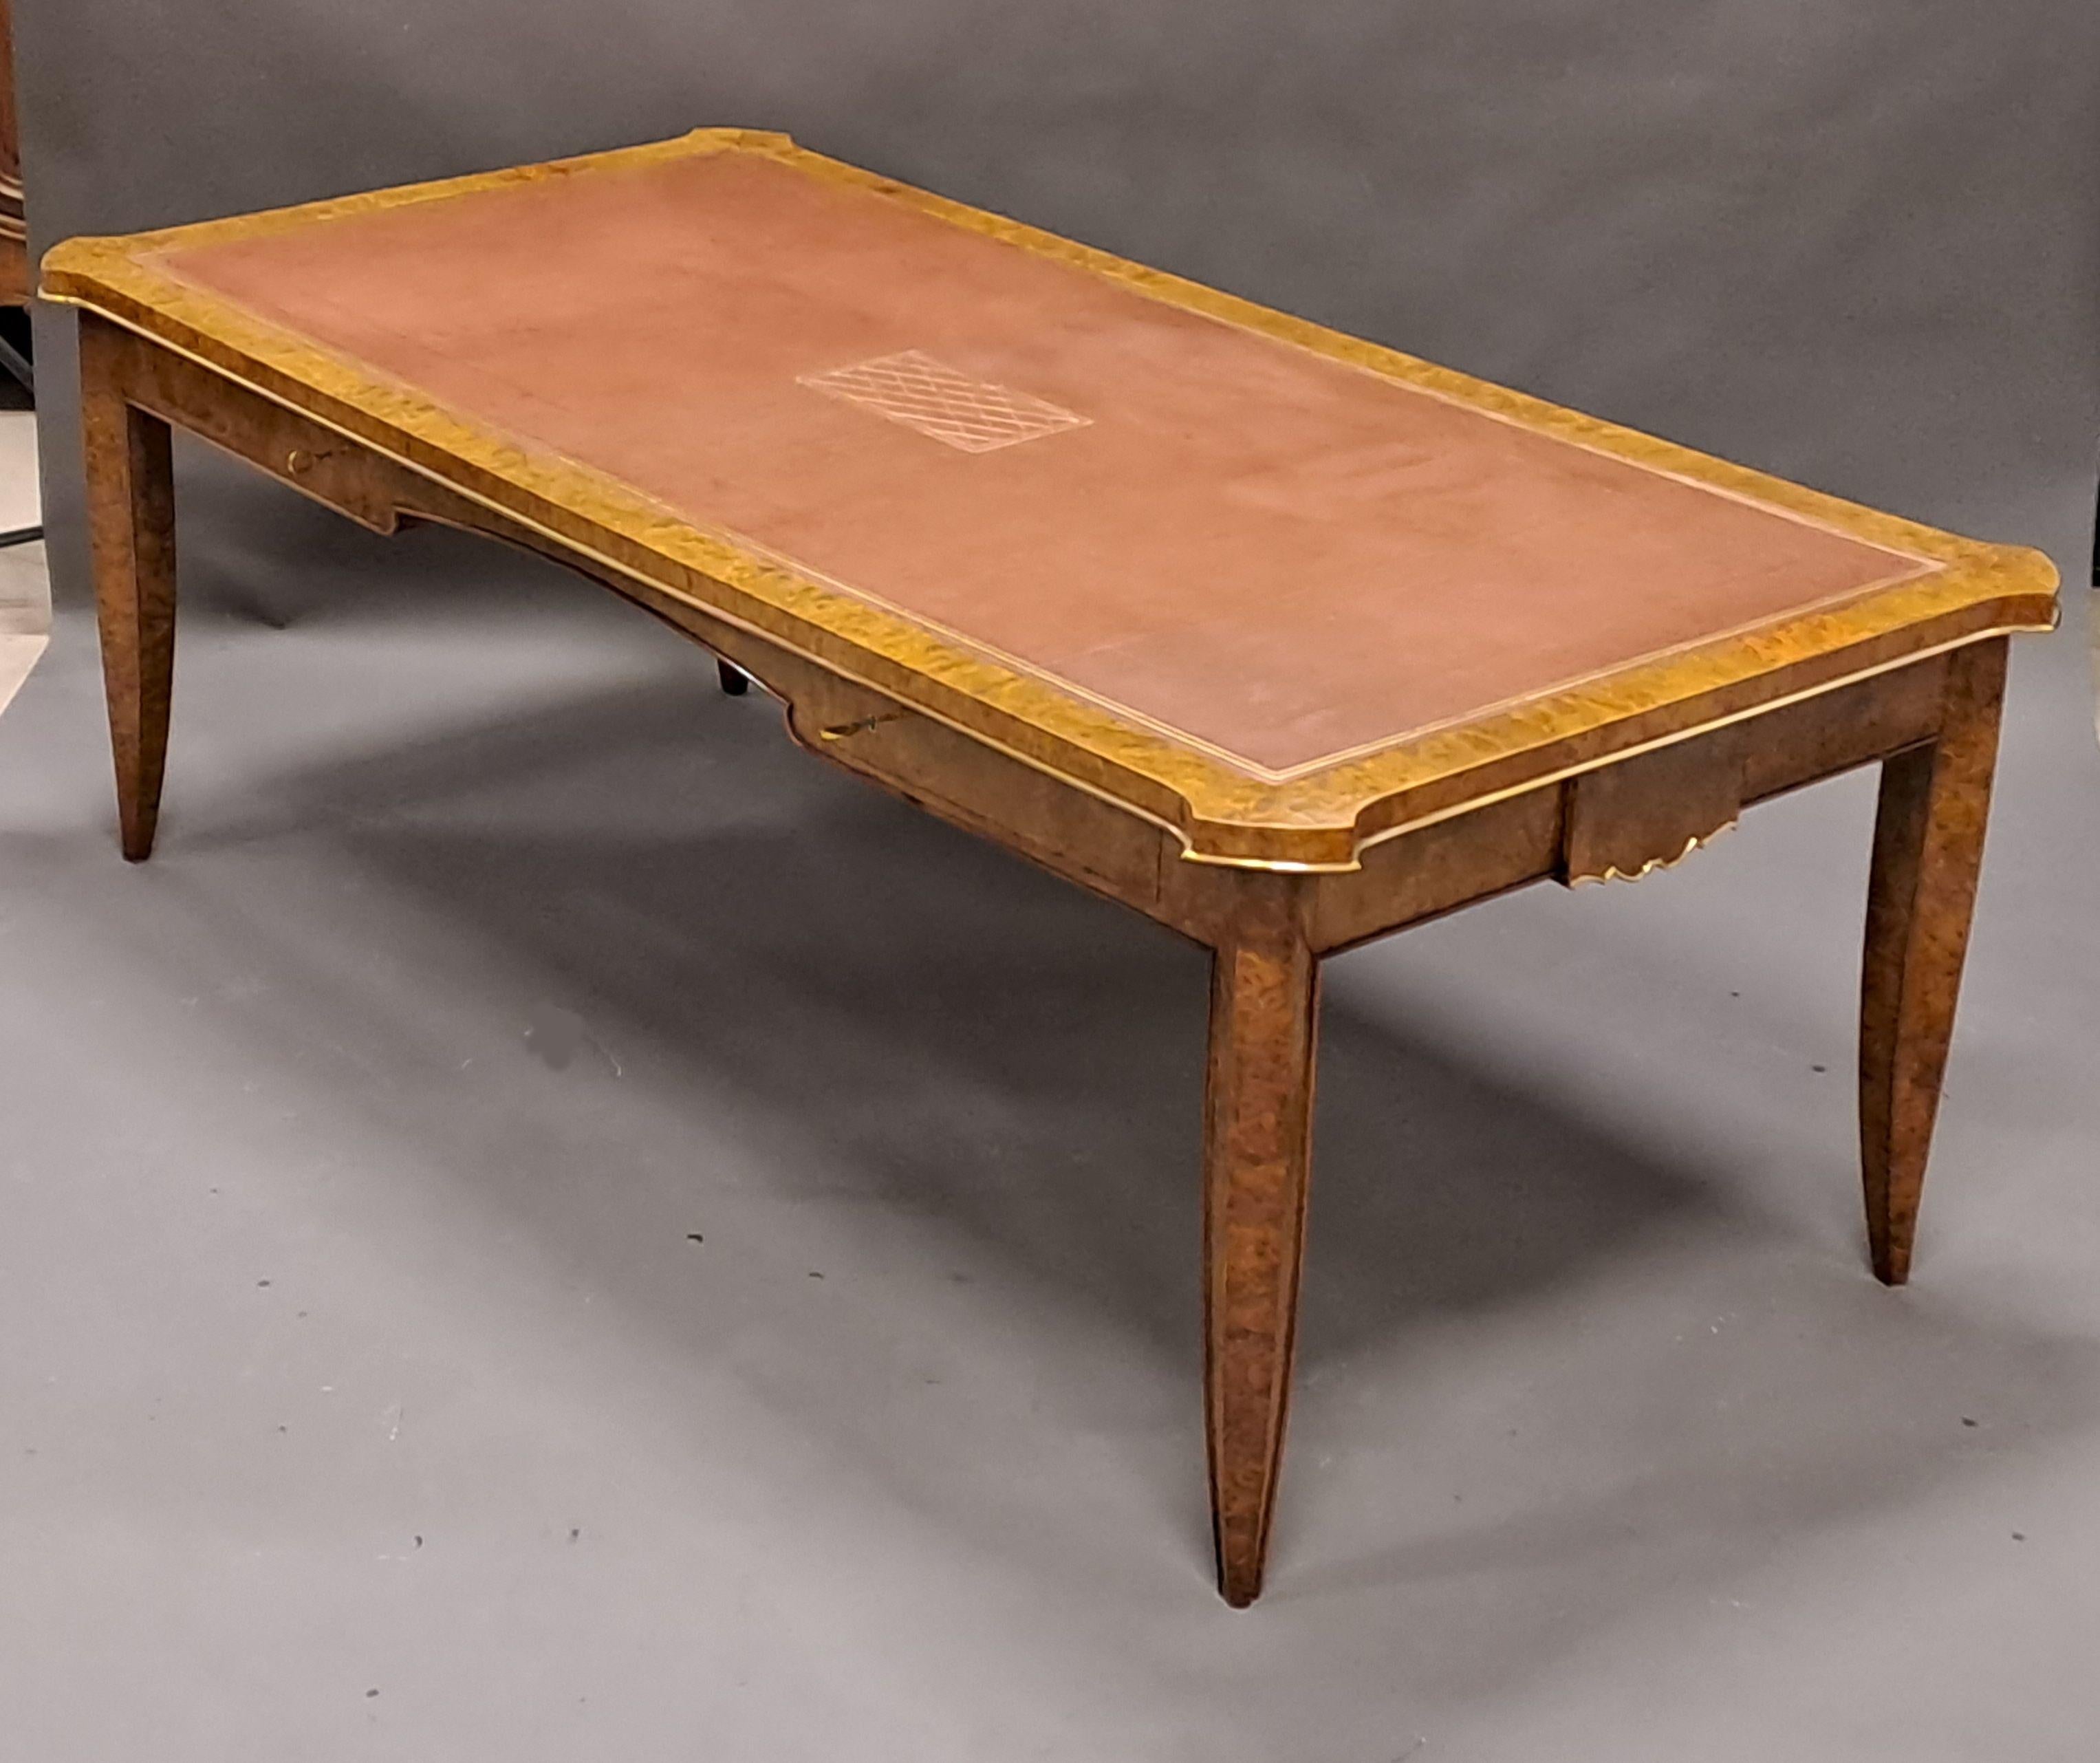 DOMIN André (1883-1962) and GENEVRIERE Marcel (1885-1967) for Maison DOMINIQUE

Magnificent flat desk in presidential format in thuja burl veneer designed by André DOMIN and Marcel GENEVRIERE, the famous art deco decorators for Maison DOMINIQUE in